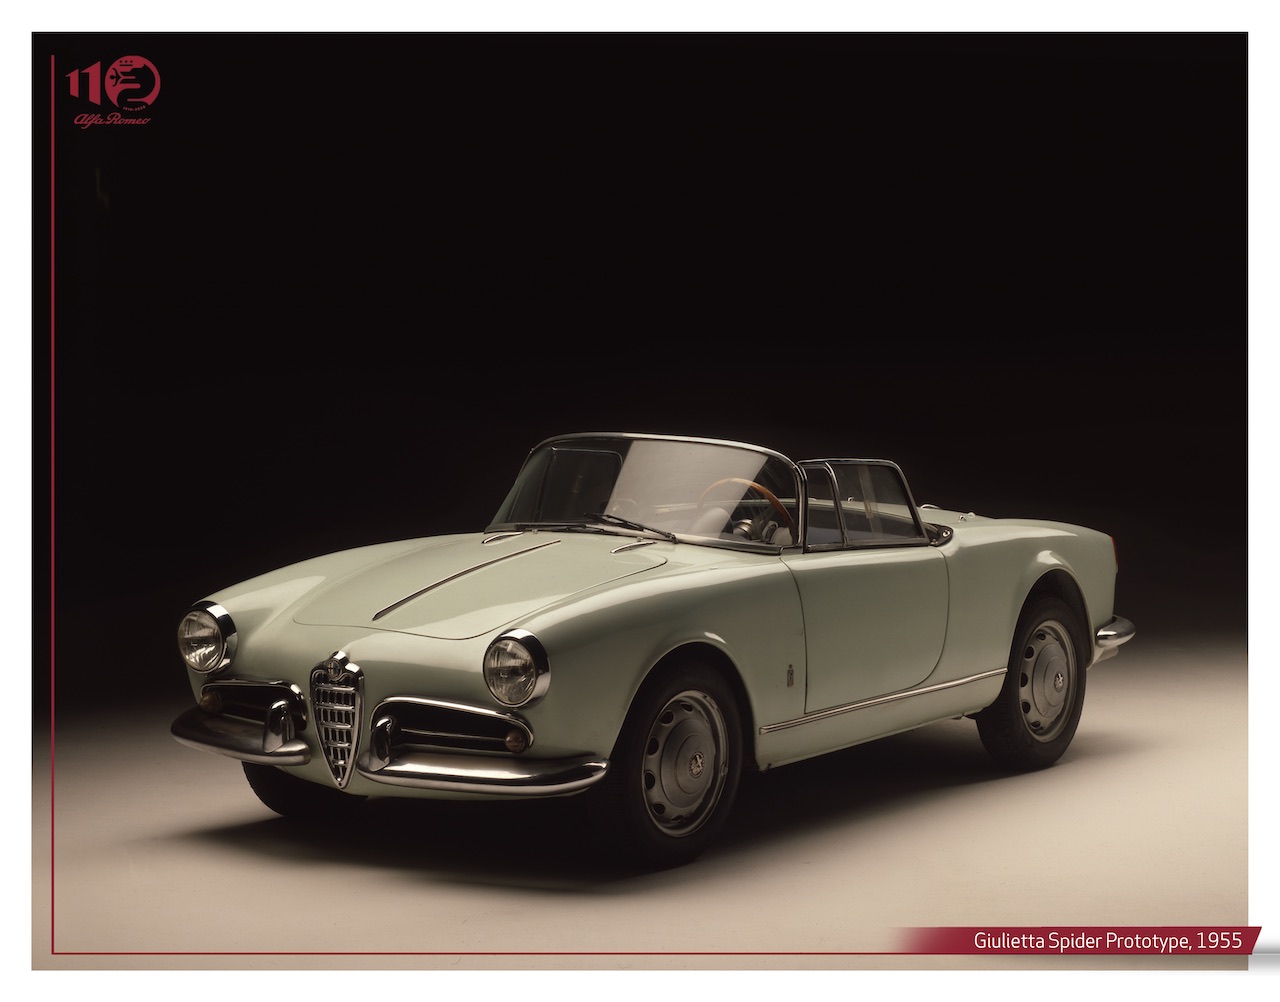 The Alfa Romeo Duetto Spider that conquered Hollywood